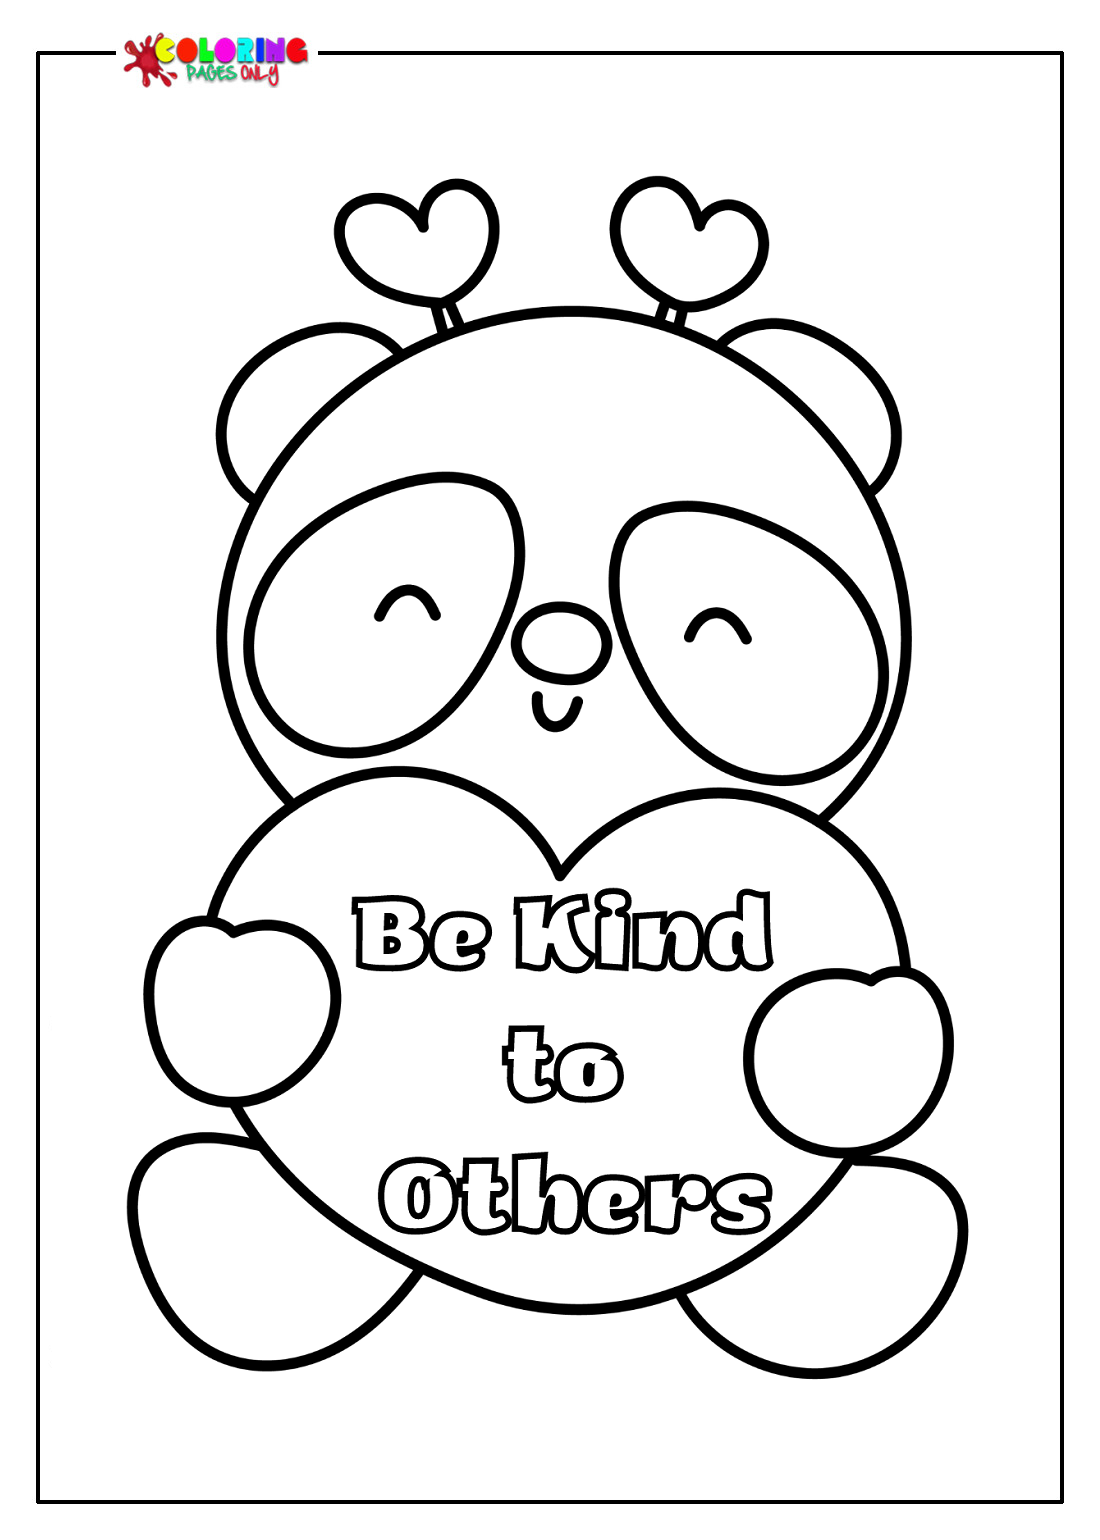 Be Kind to Others Coloring Pages